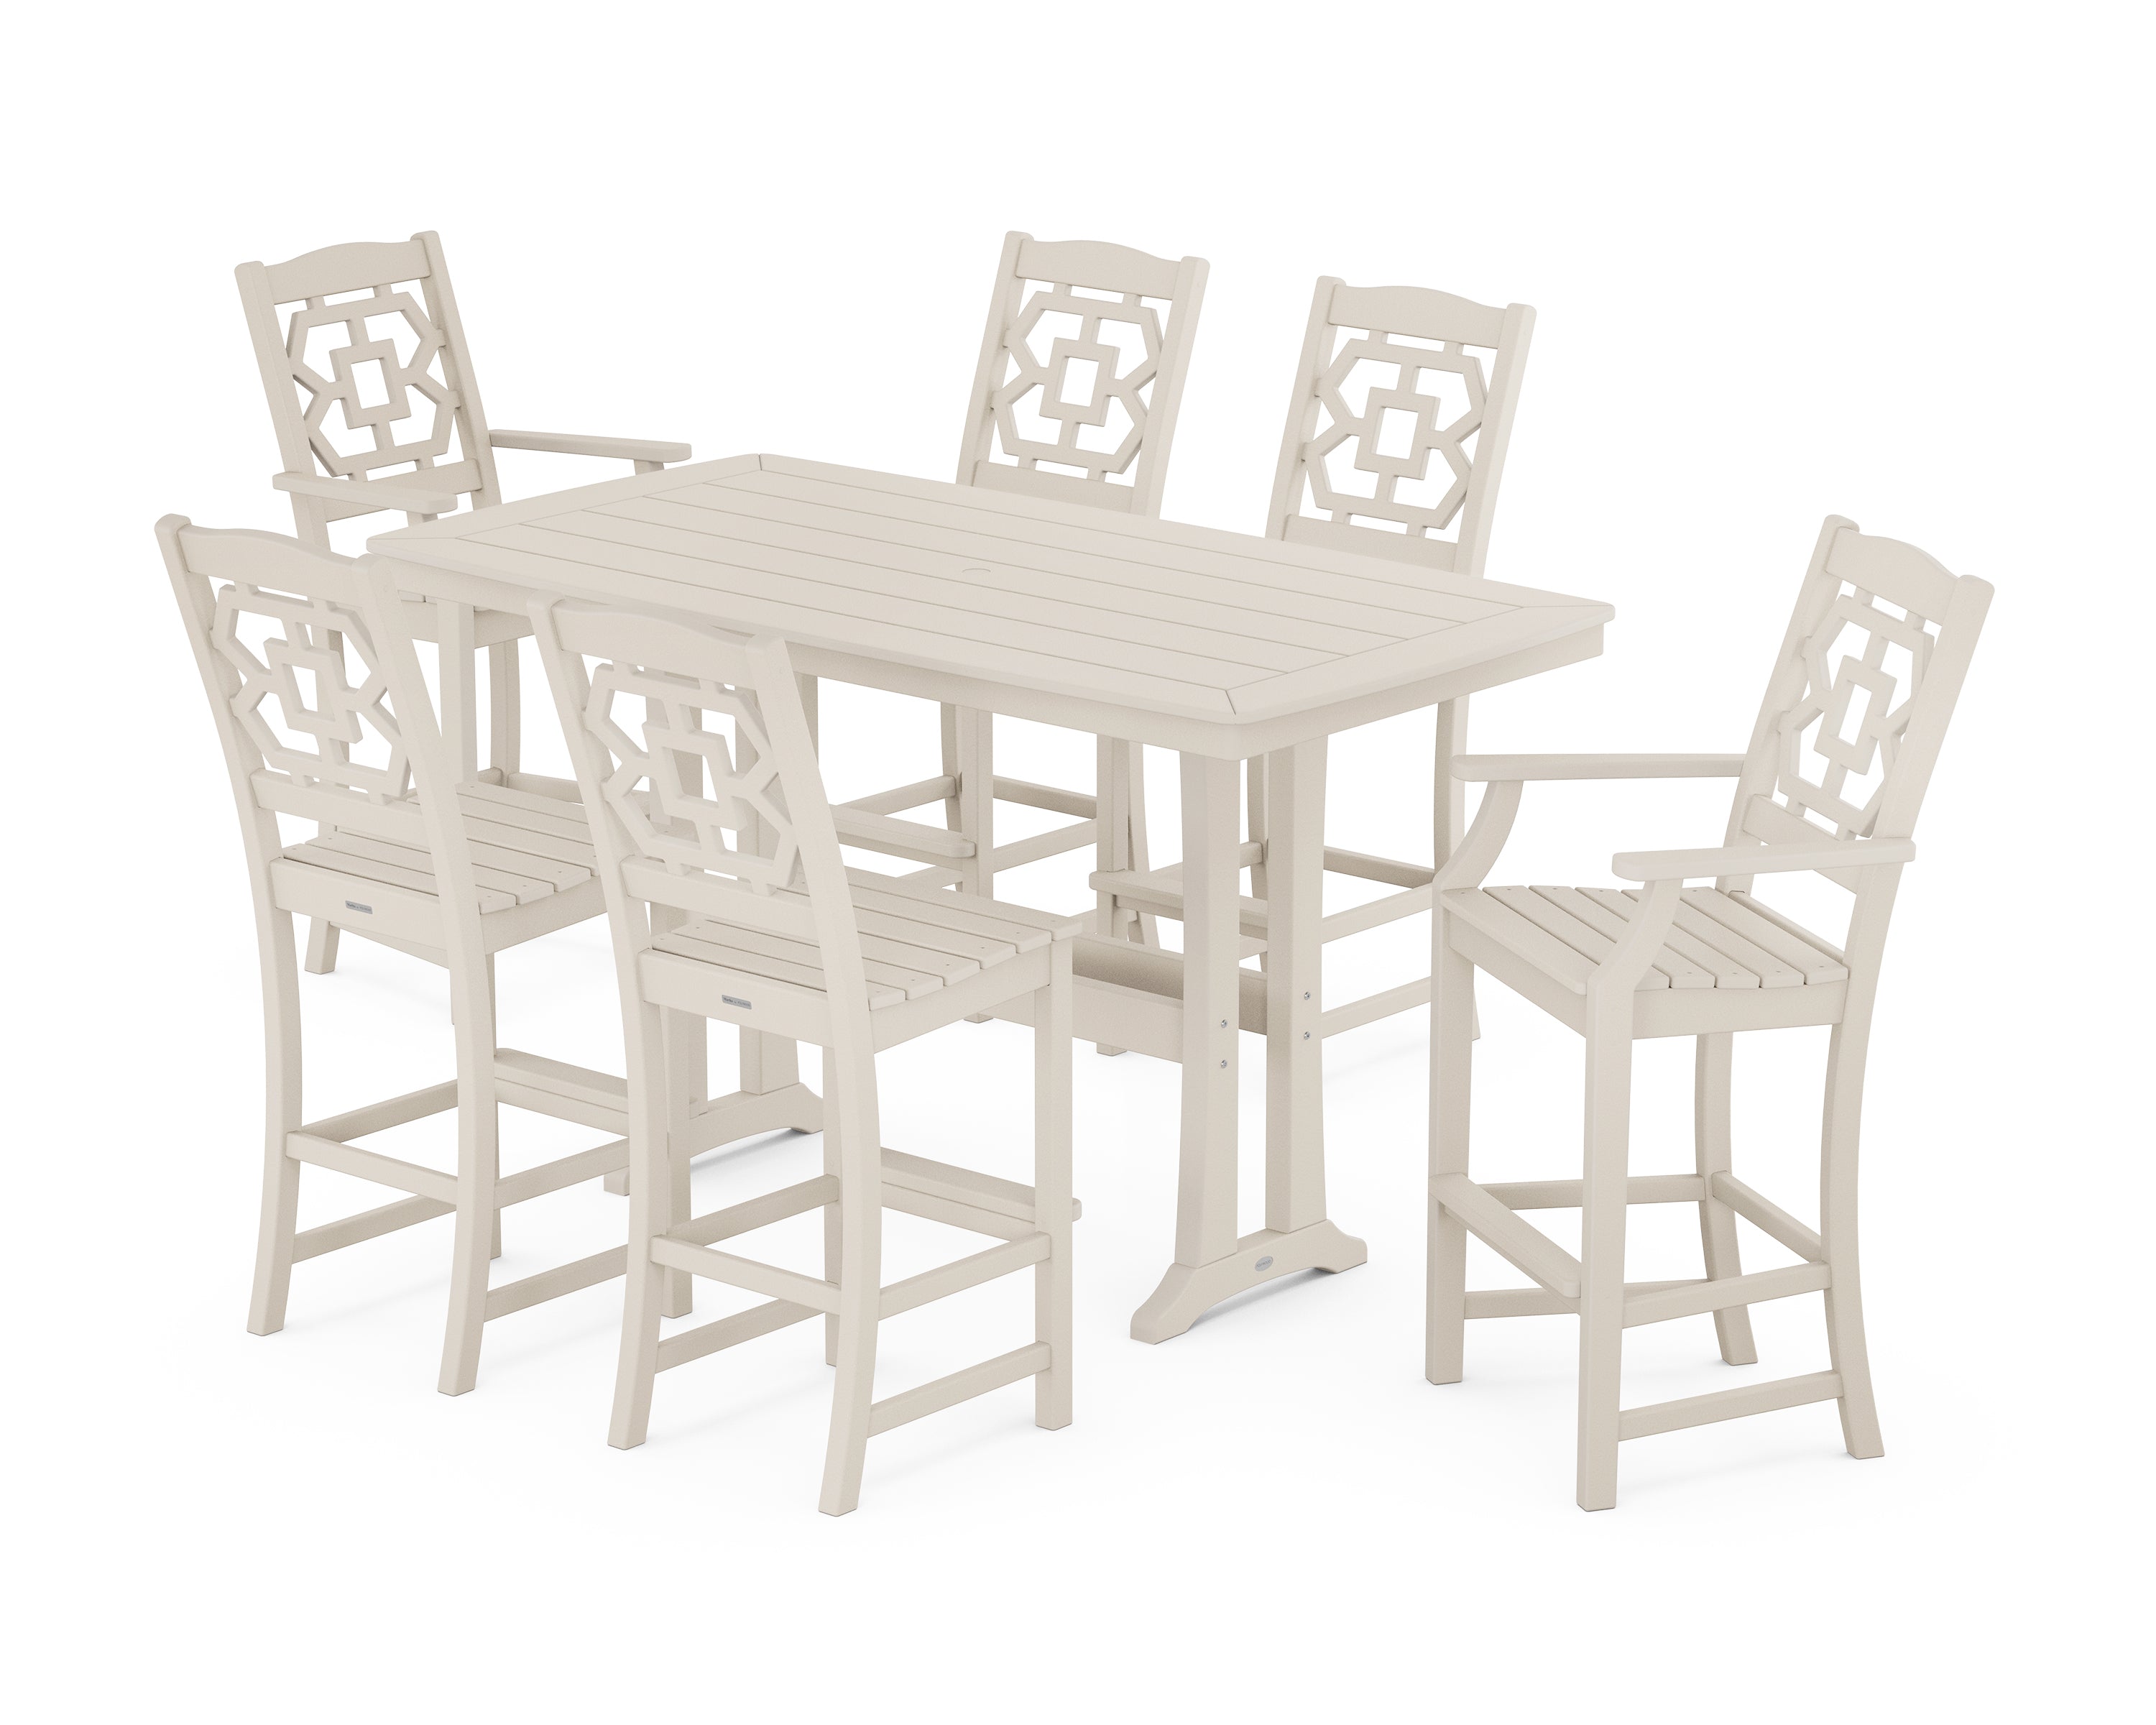 Martha Stewart by POLYWOOD® Chinoiserie 7-Piece Bar Set with Trestle Legs in Sand